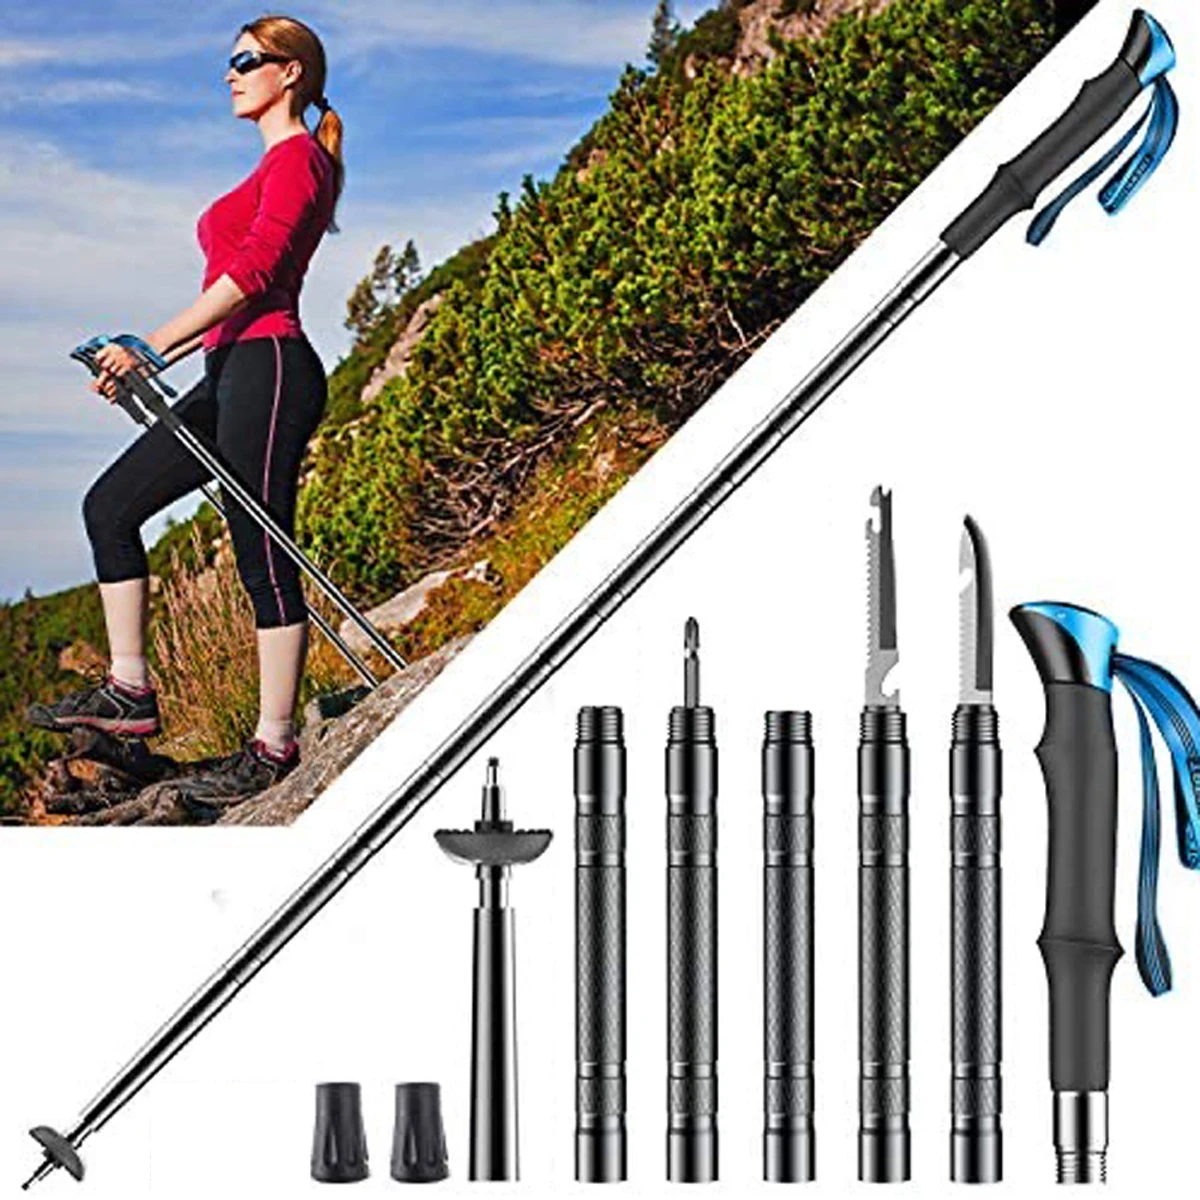 Safety Survival Tactical Cane Walking Hiking Stick Outdoor Camping Tool 